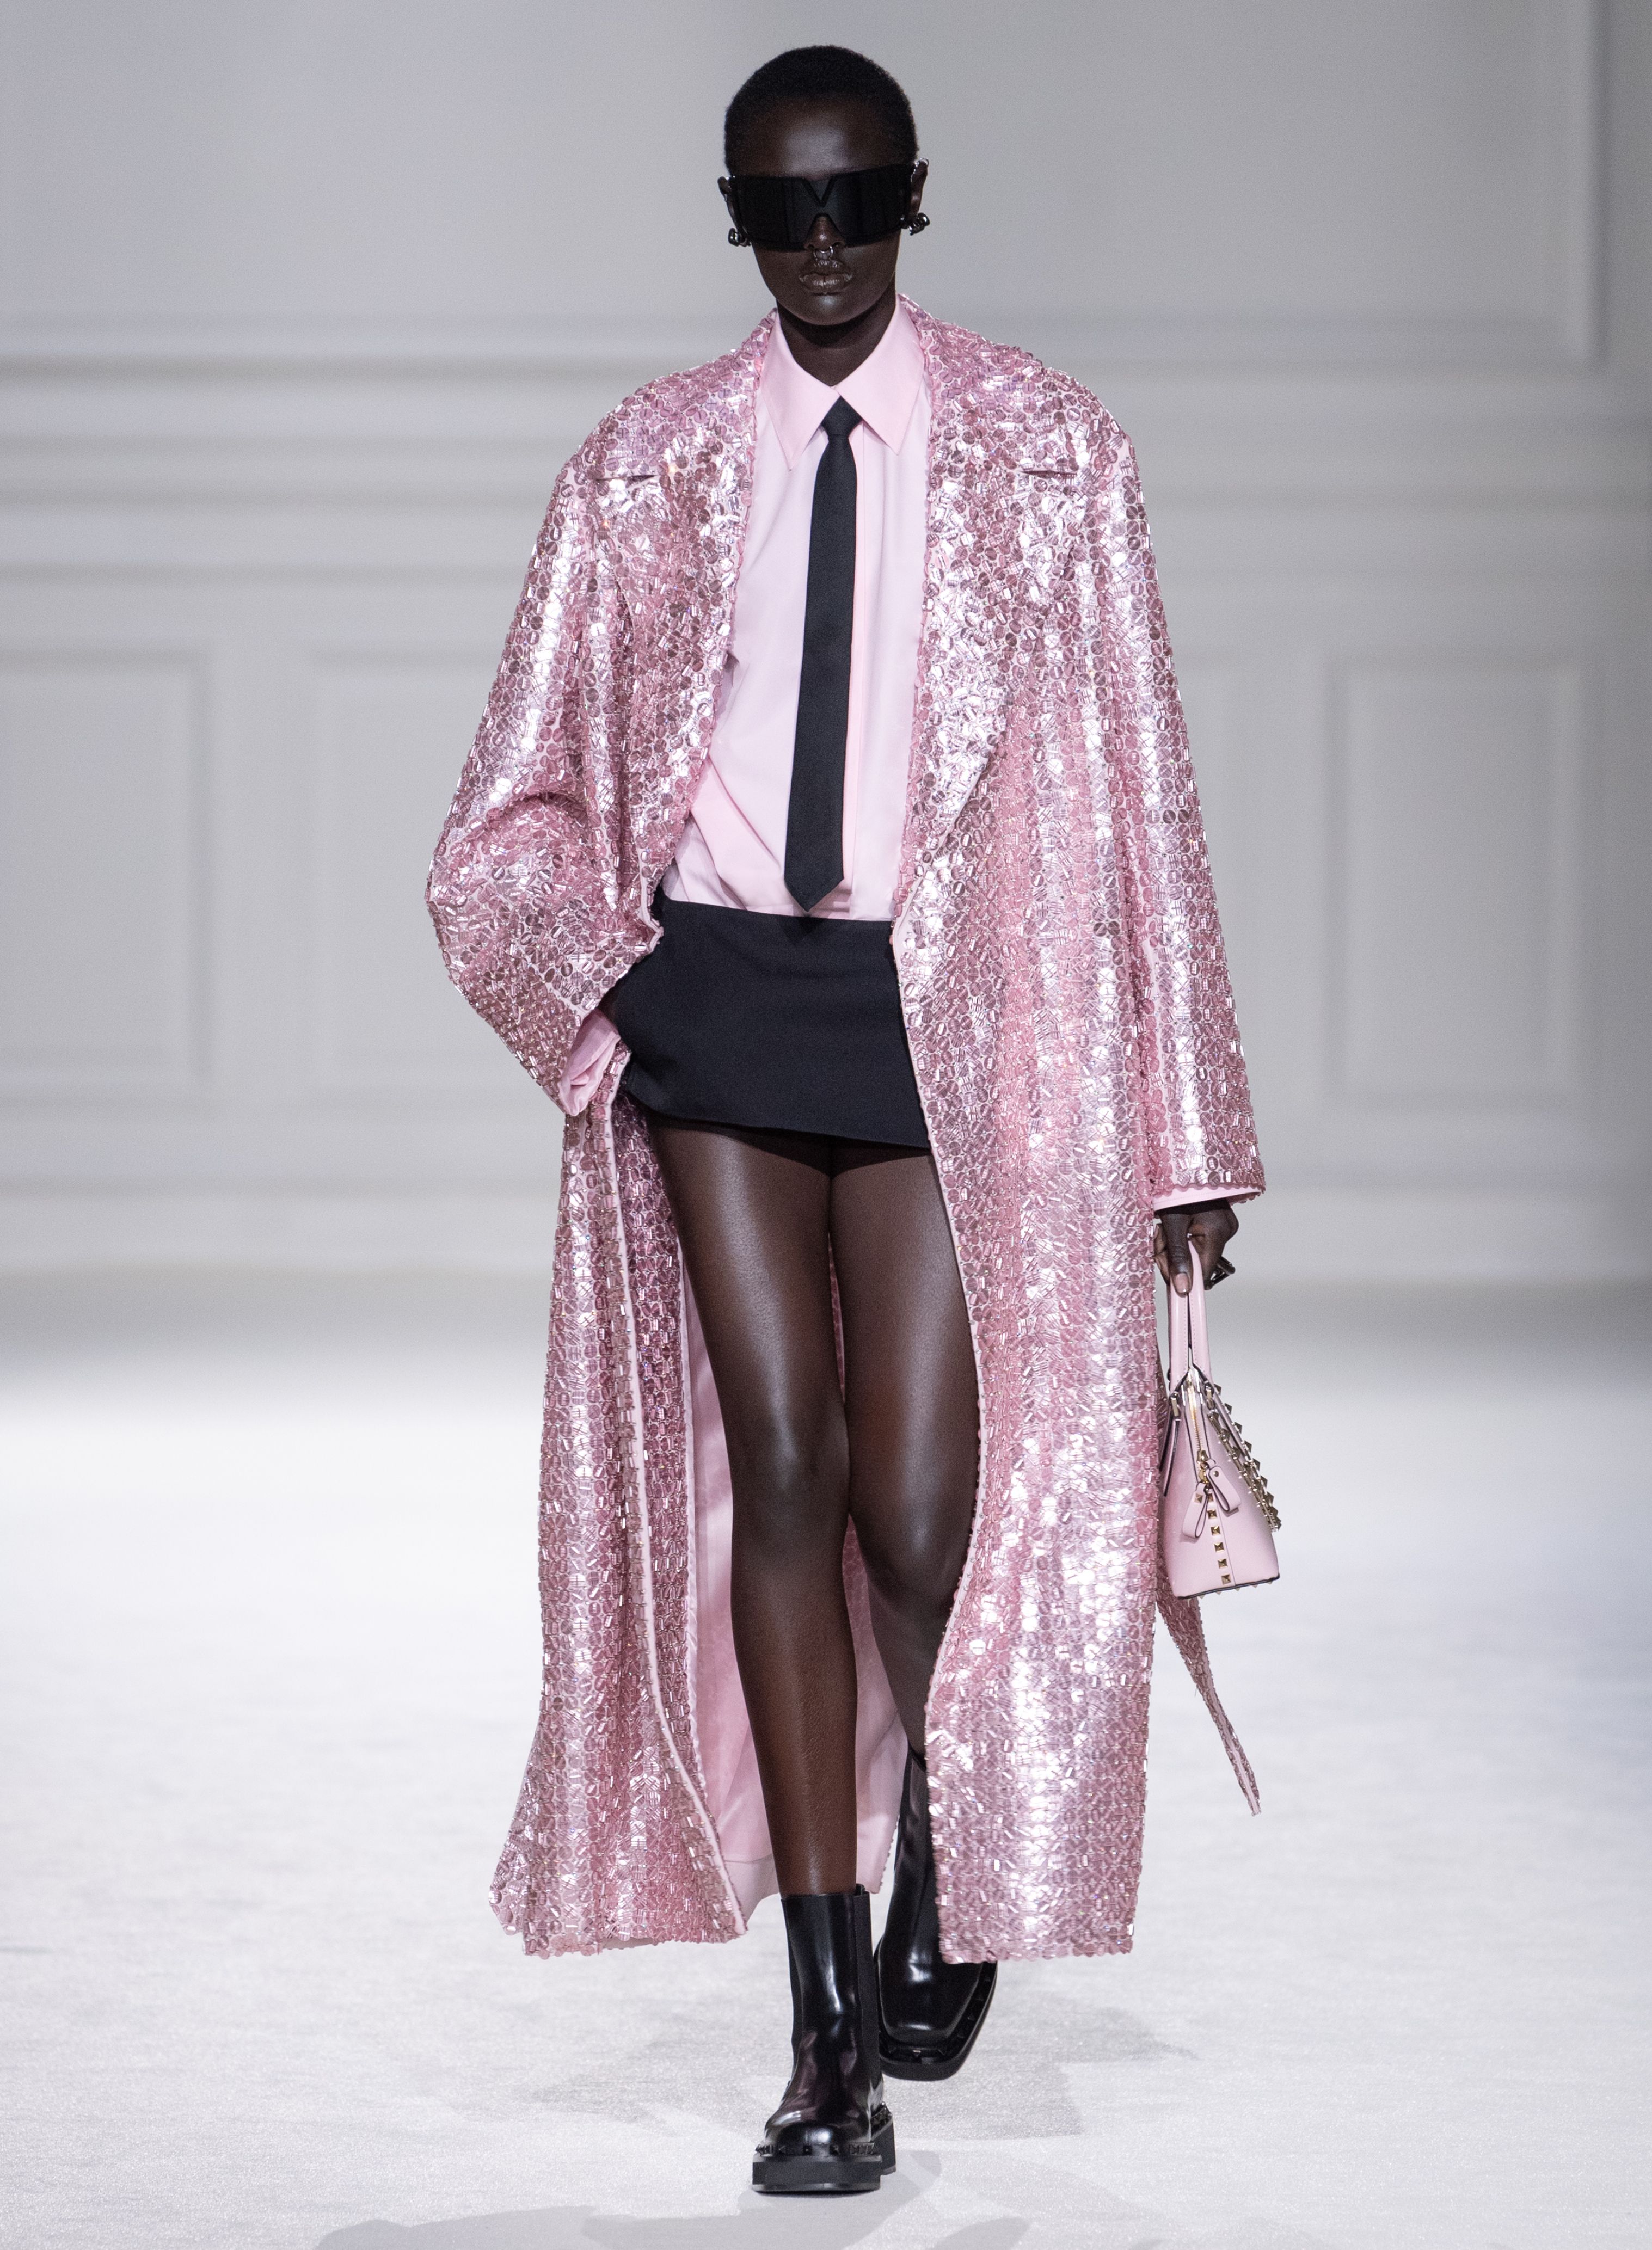 Our Favorite Moments from Paris Fashion Week – Spotlight